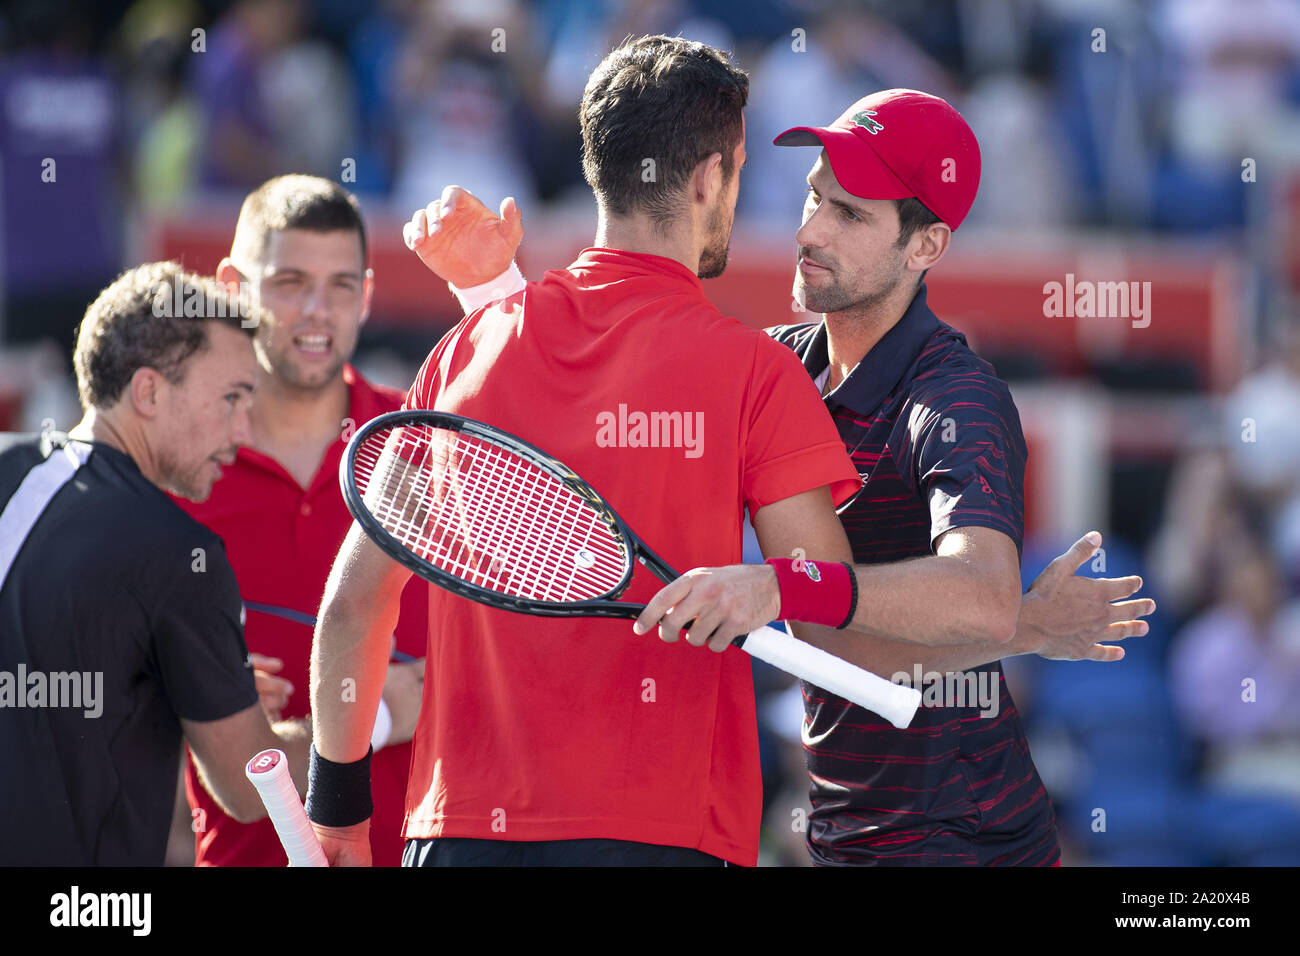 Tokyo, Japan. 30th Sep, 2019. Filip Krajinovic (SRB) and Novak Djokovic  (SRB) shake hands with Mate Pavic (CRO) and Bruno Soares (BRA) after lost  their first Men's Doubles match during the Rakuten